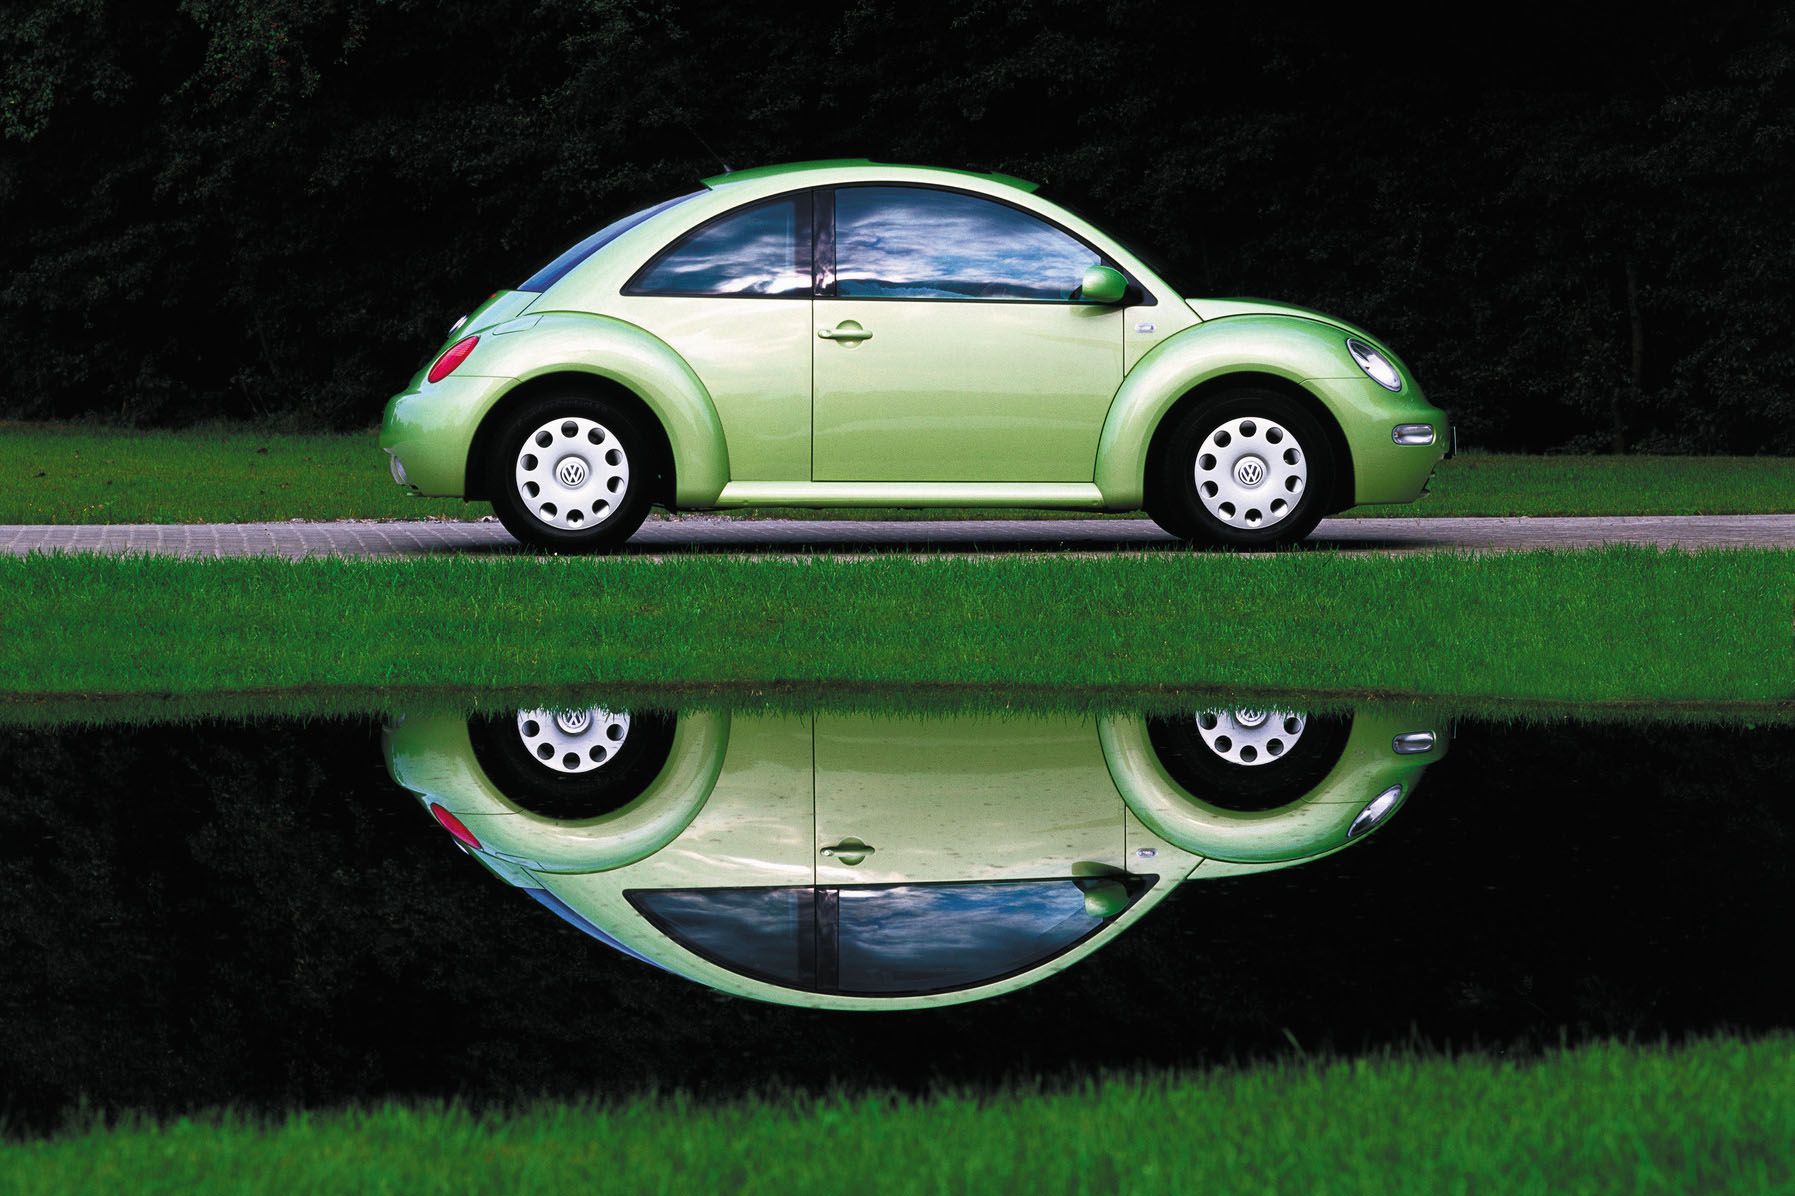 Colin-on-Cars - How the (new) Beetle became a pop icon